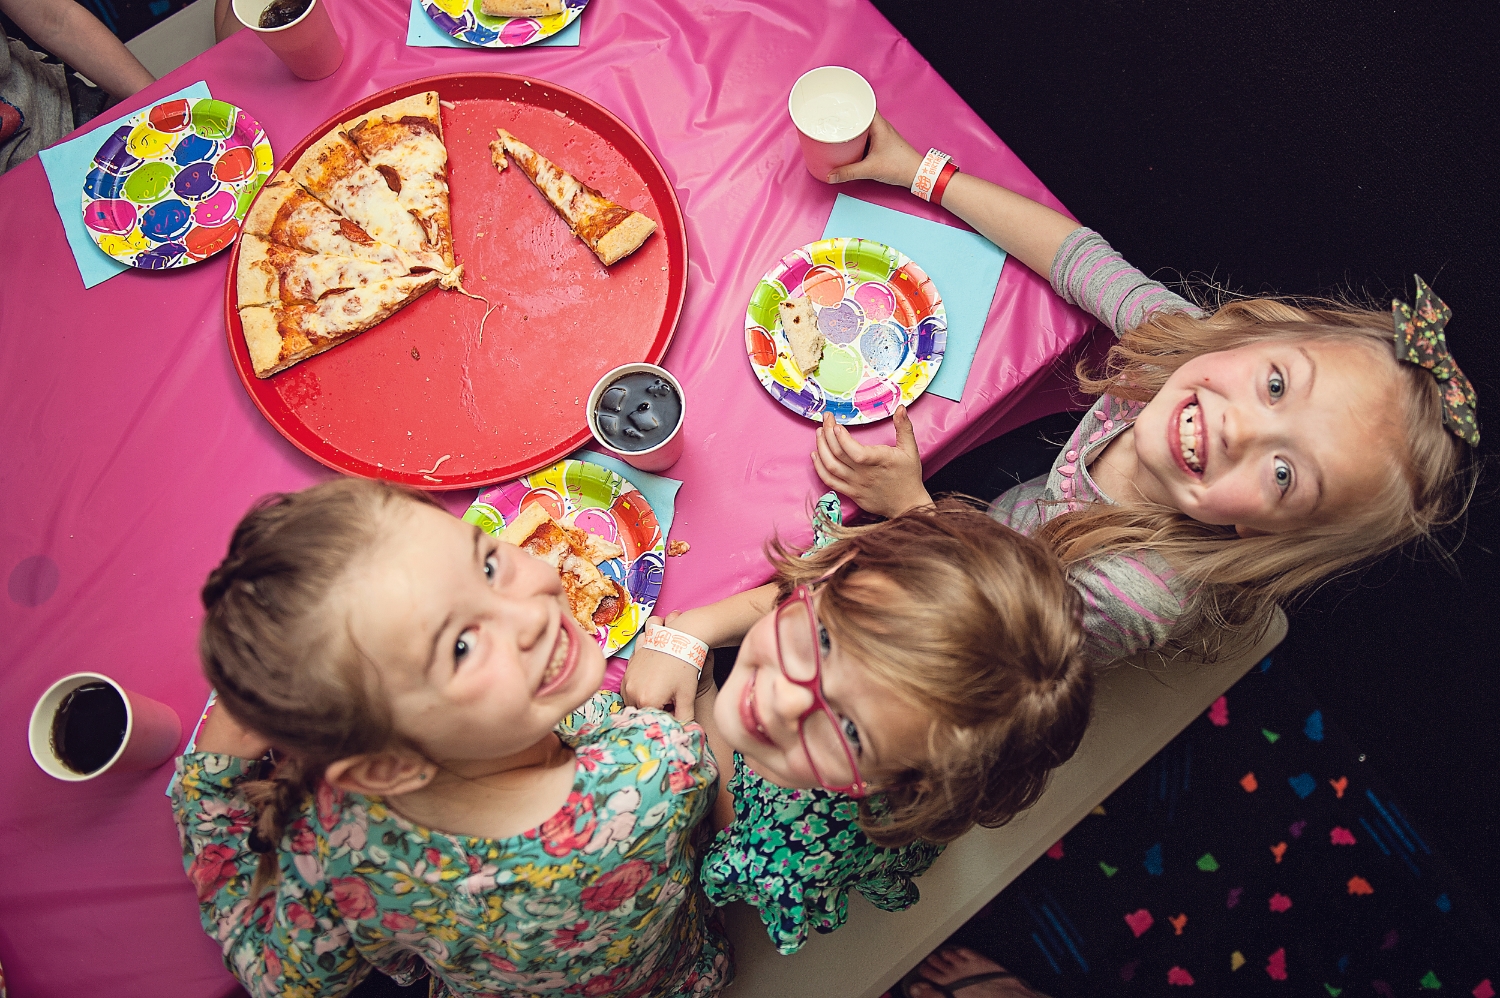  young girls looking up at the camera while eating pizza at a birthday party 